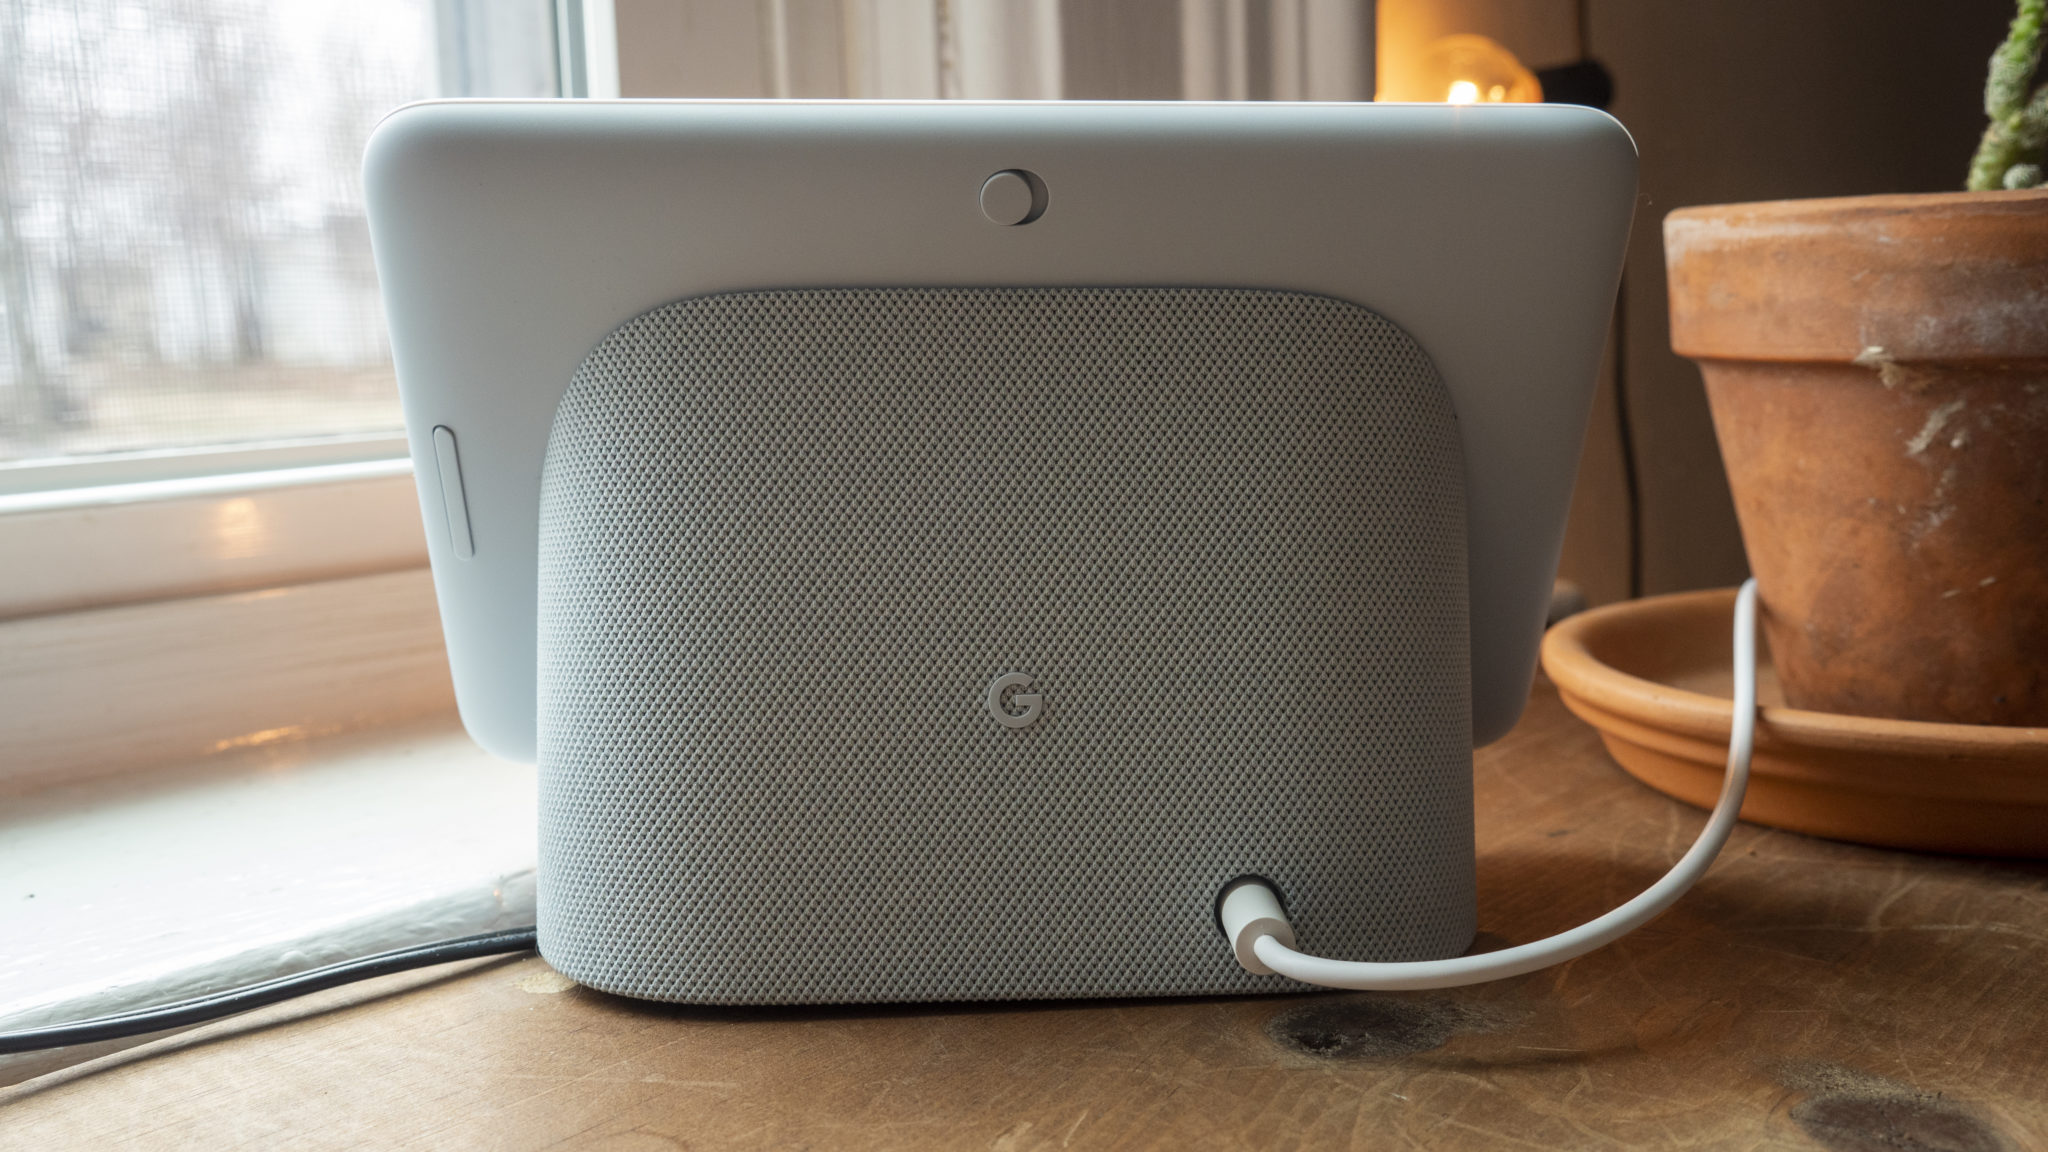 Google confirms new smart home products will launch at I/O